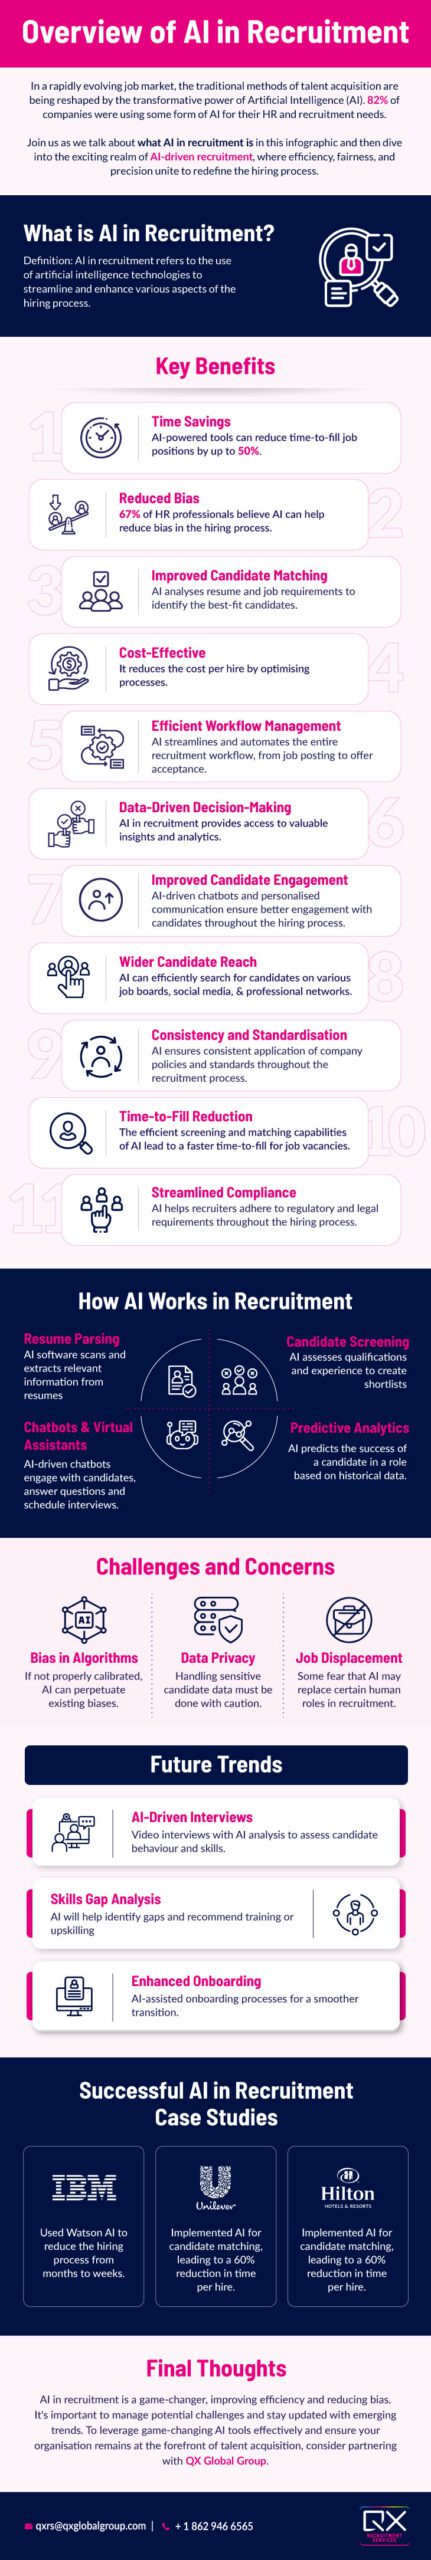 Overview of AI in Recruitment